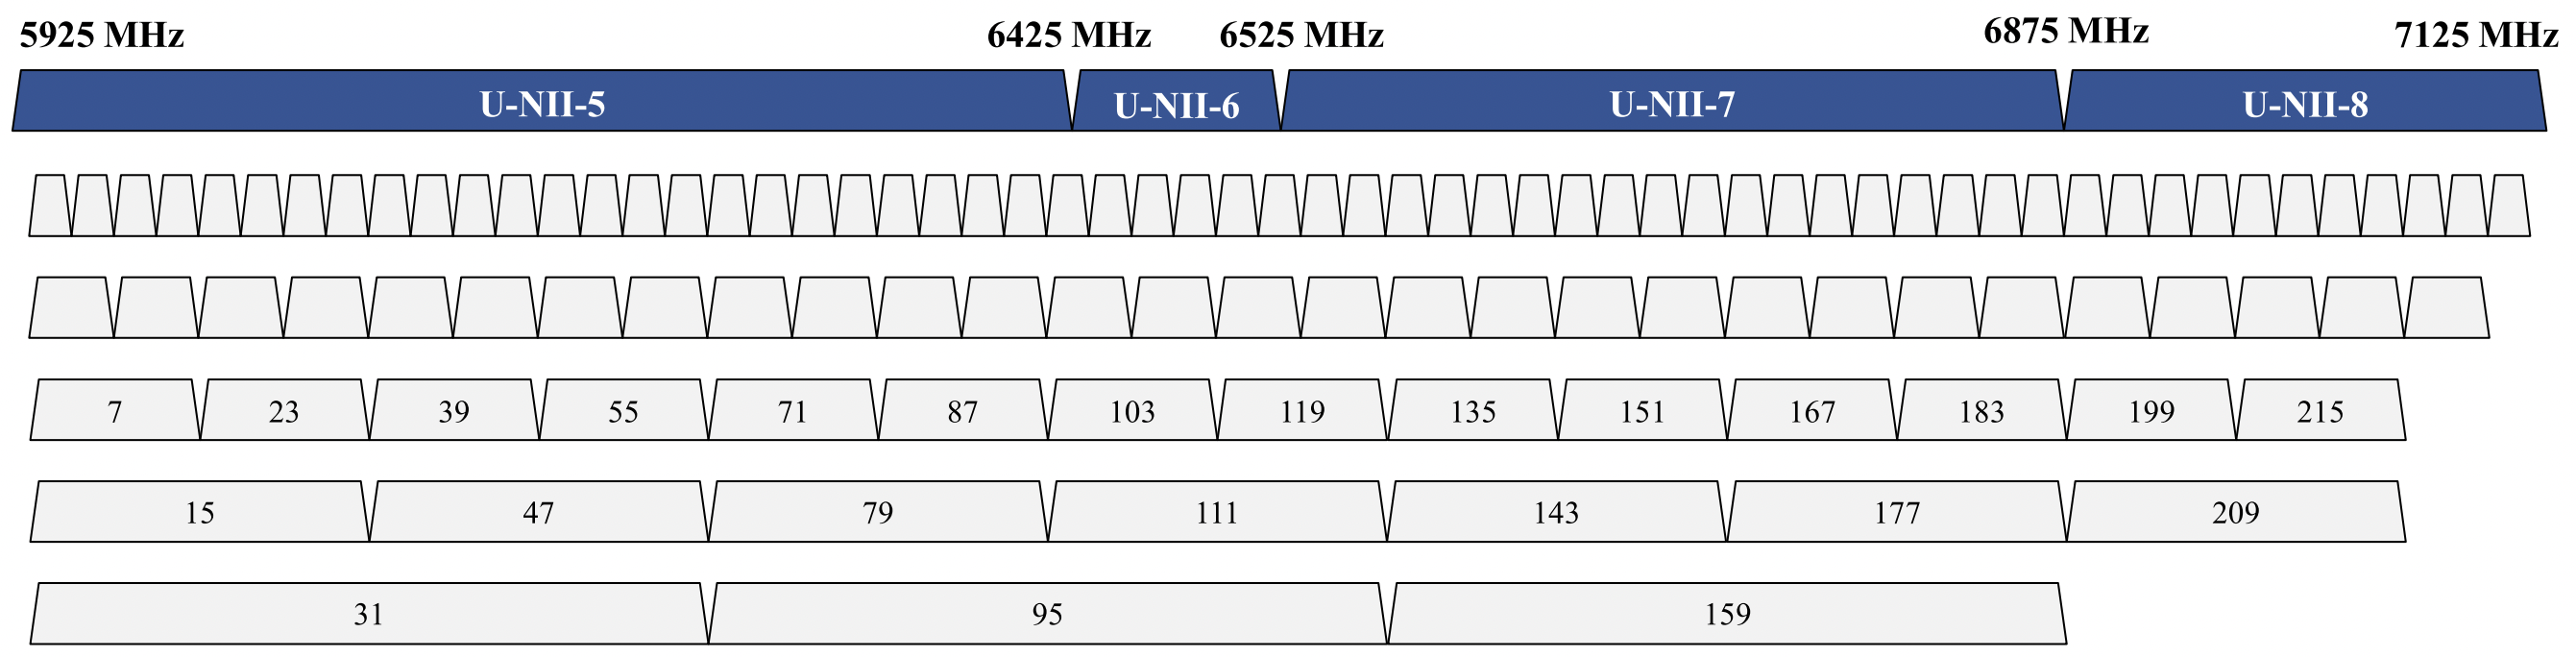 6 GHz Channels in the USA